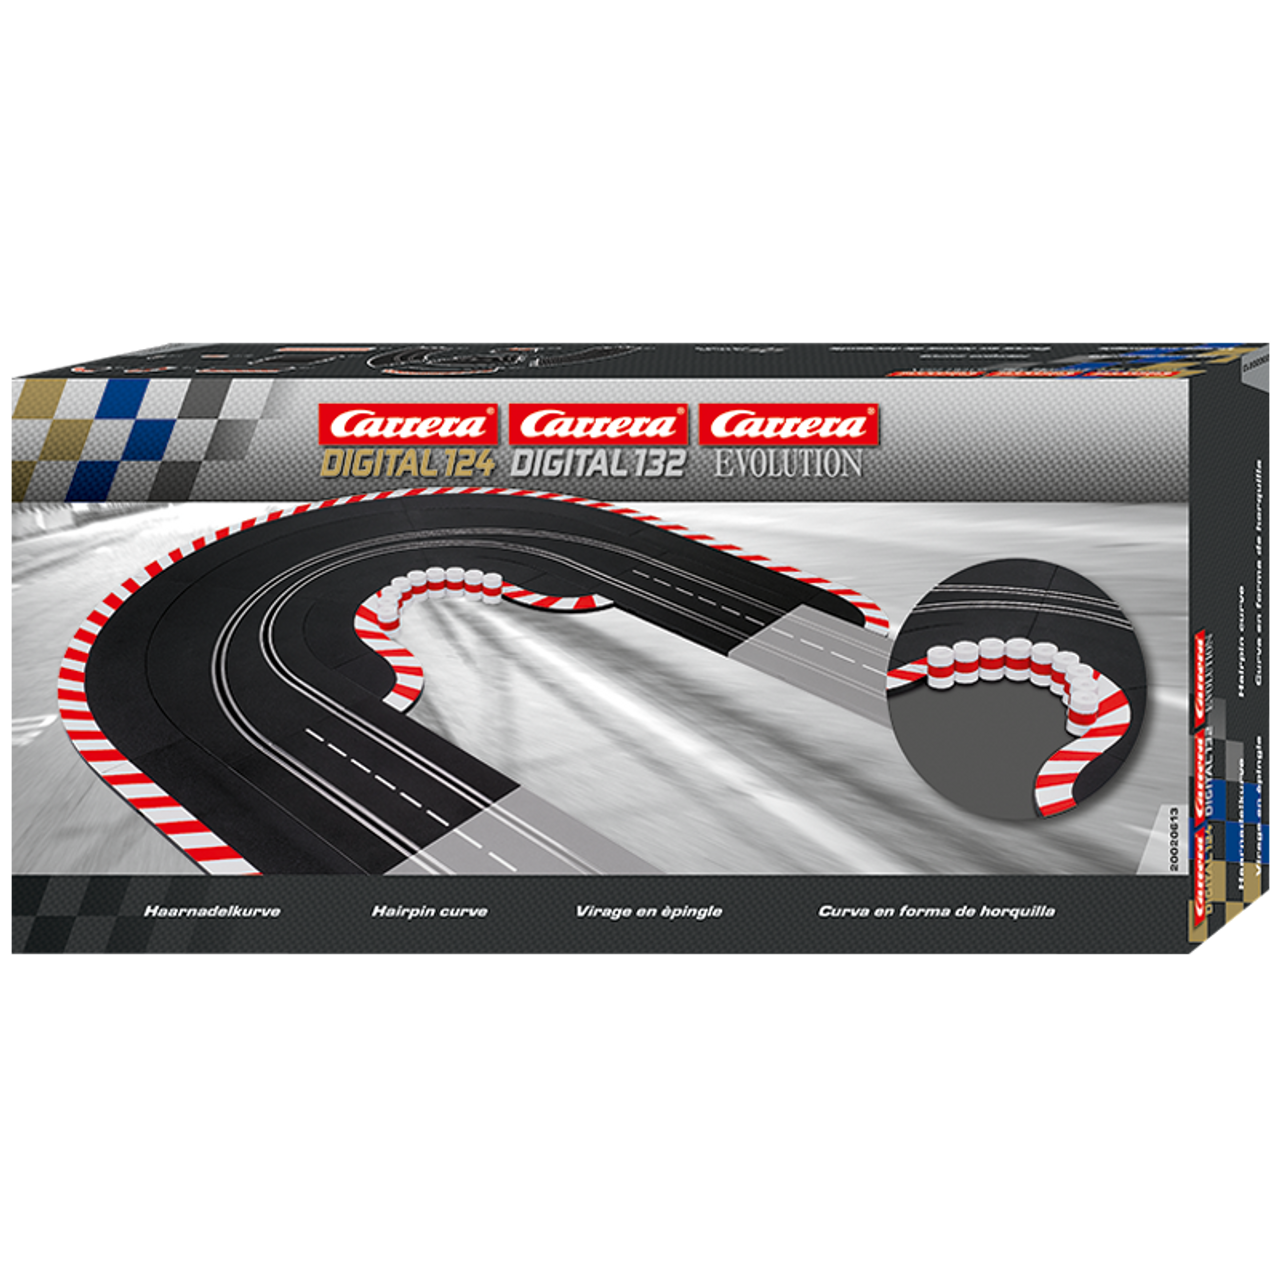 Carrera Hairpin Curve Slot Car Race Track, 50% OFF